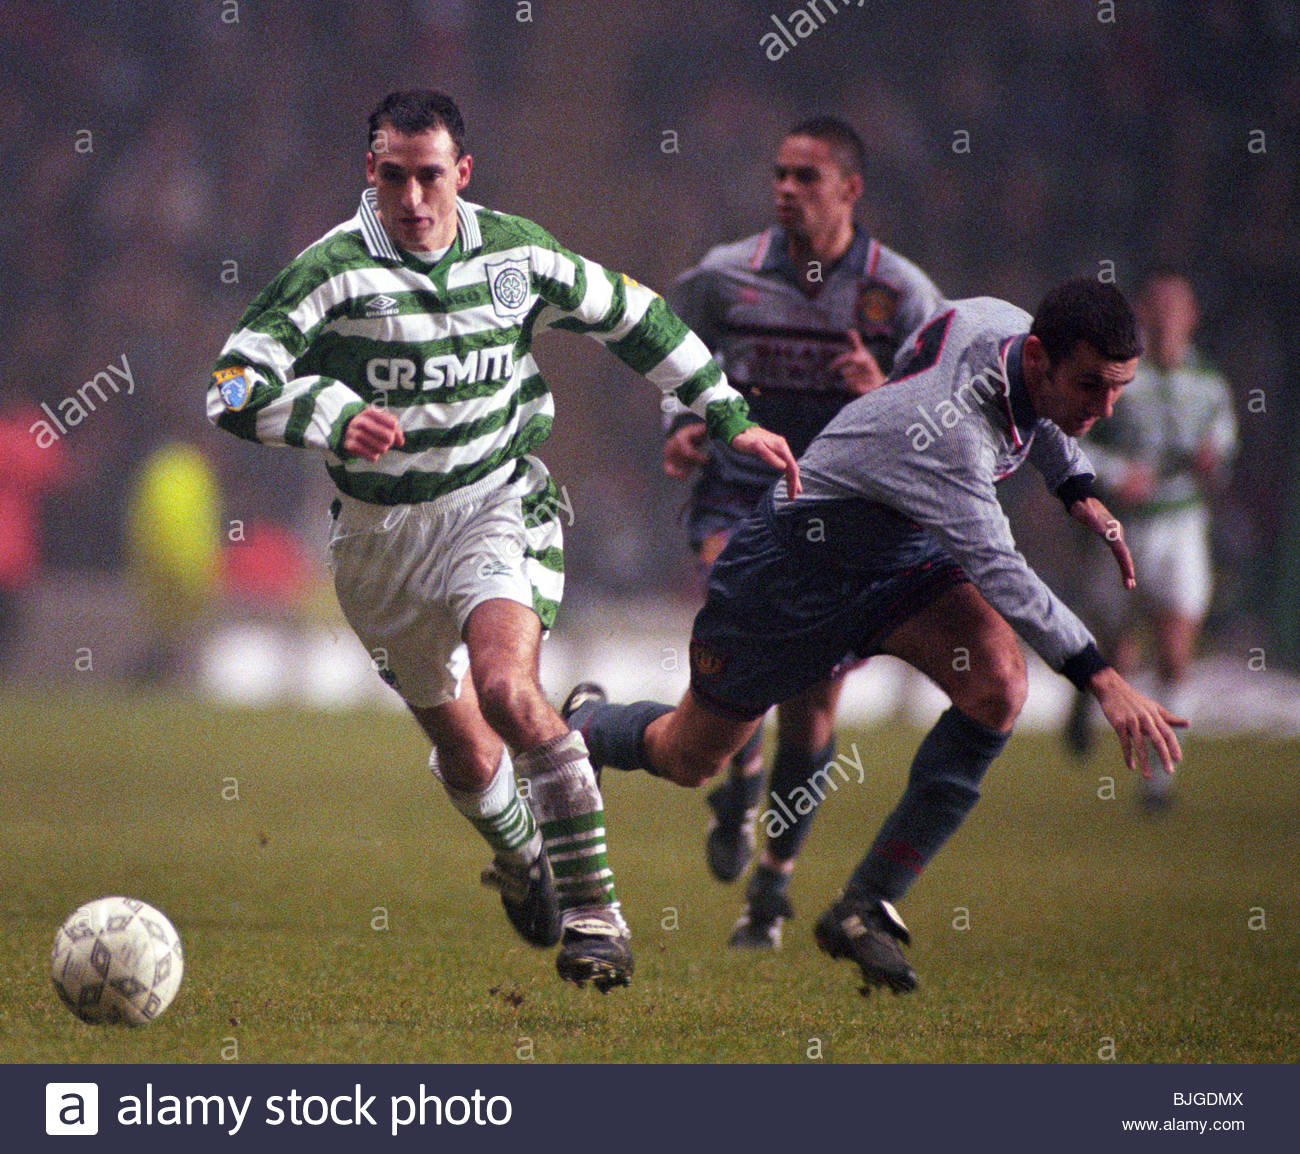 Image result for paul mcstay celtic